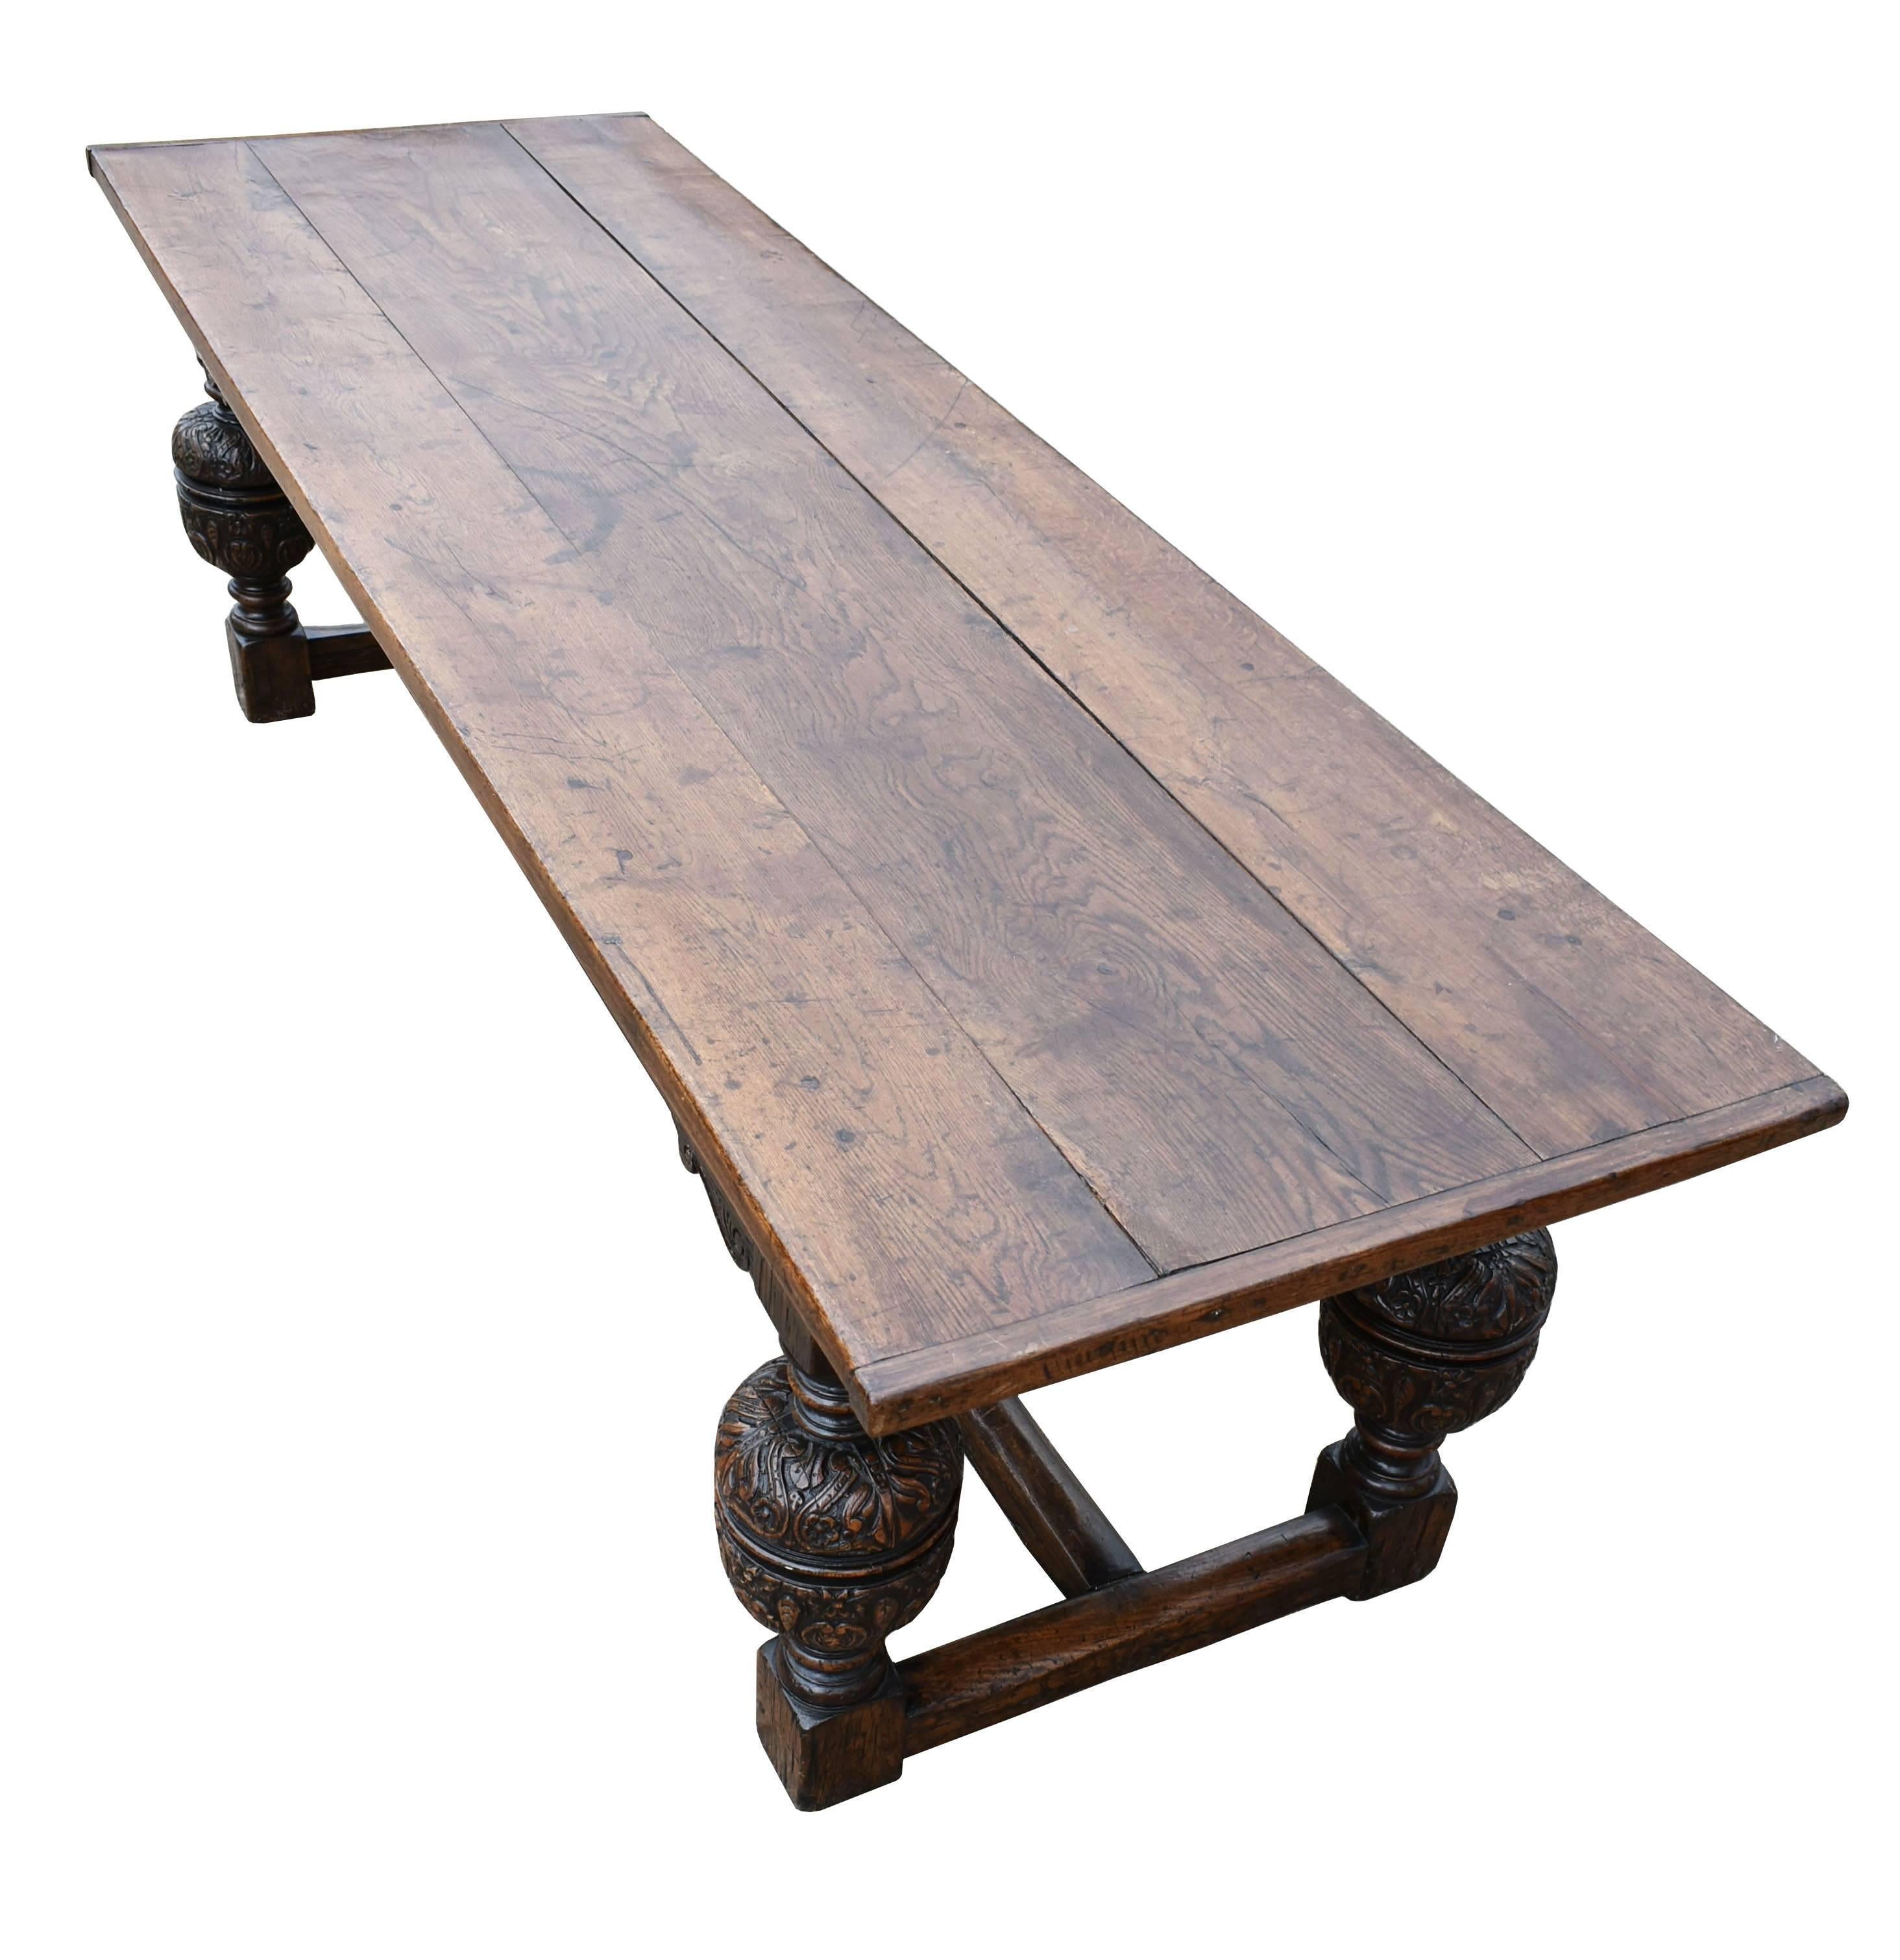 Hand-Carved 17th Century Large Solid Oak Refectory Table